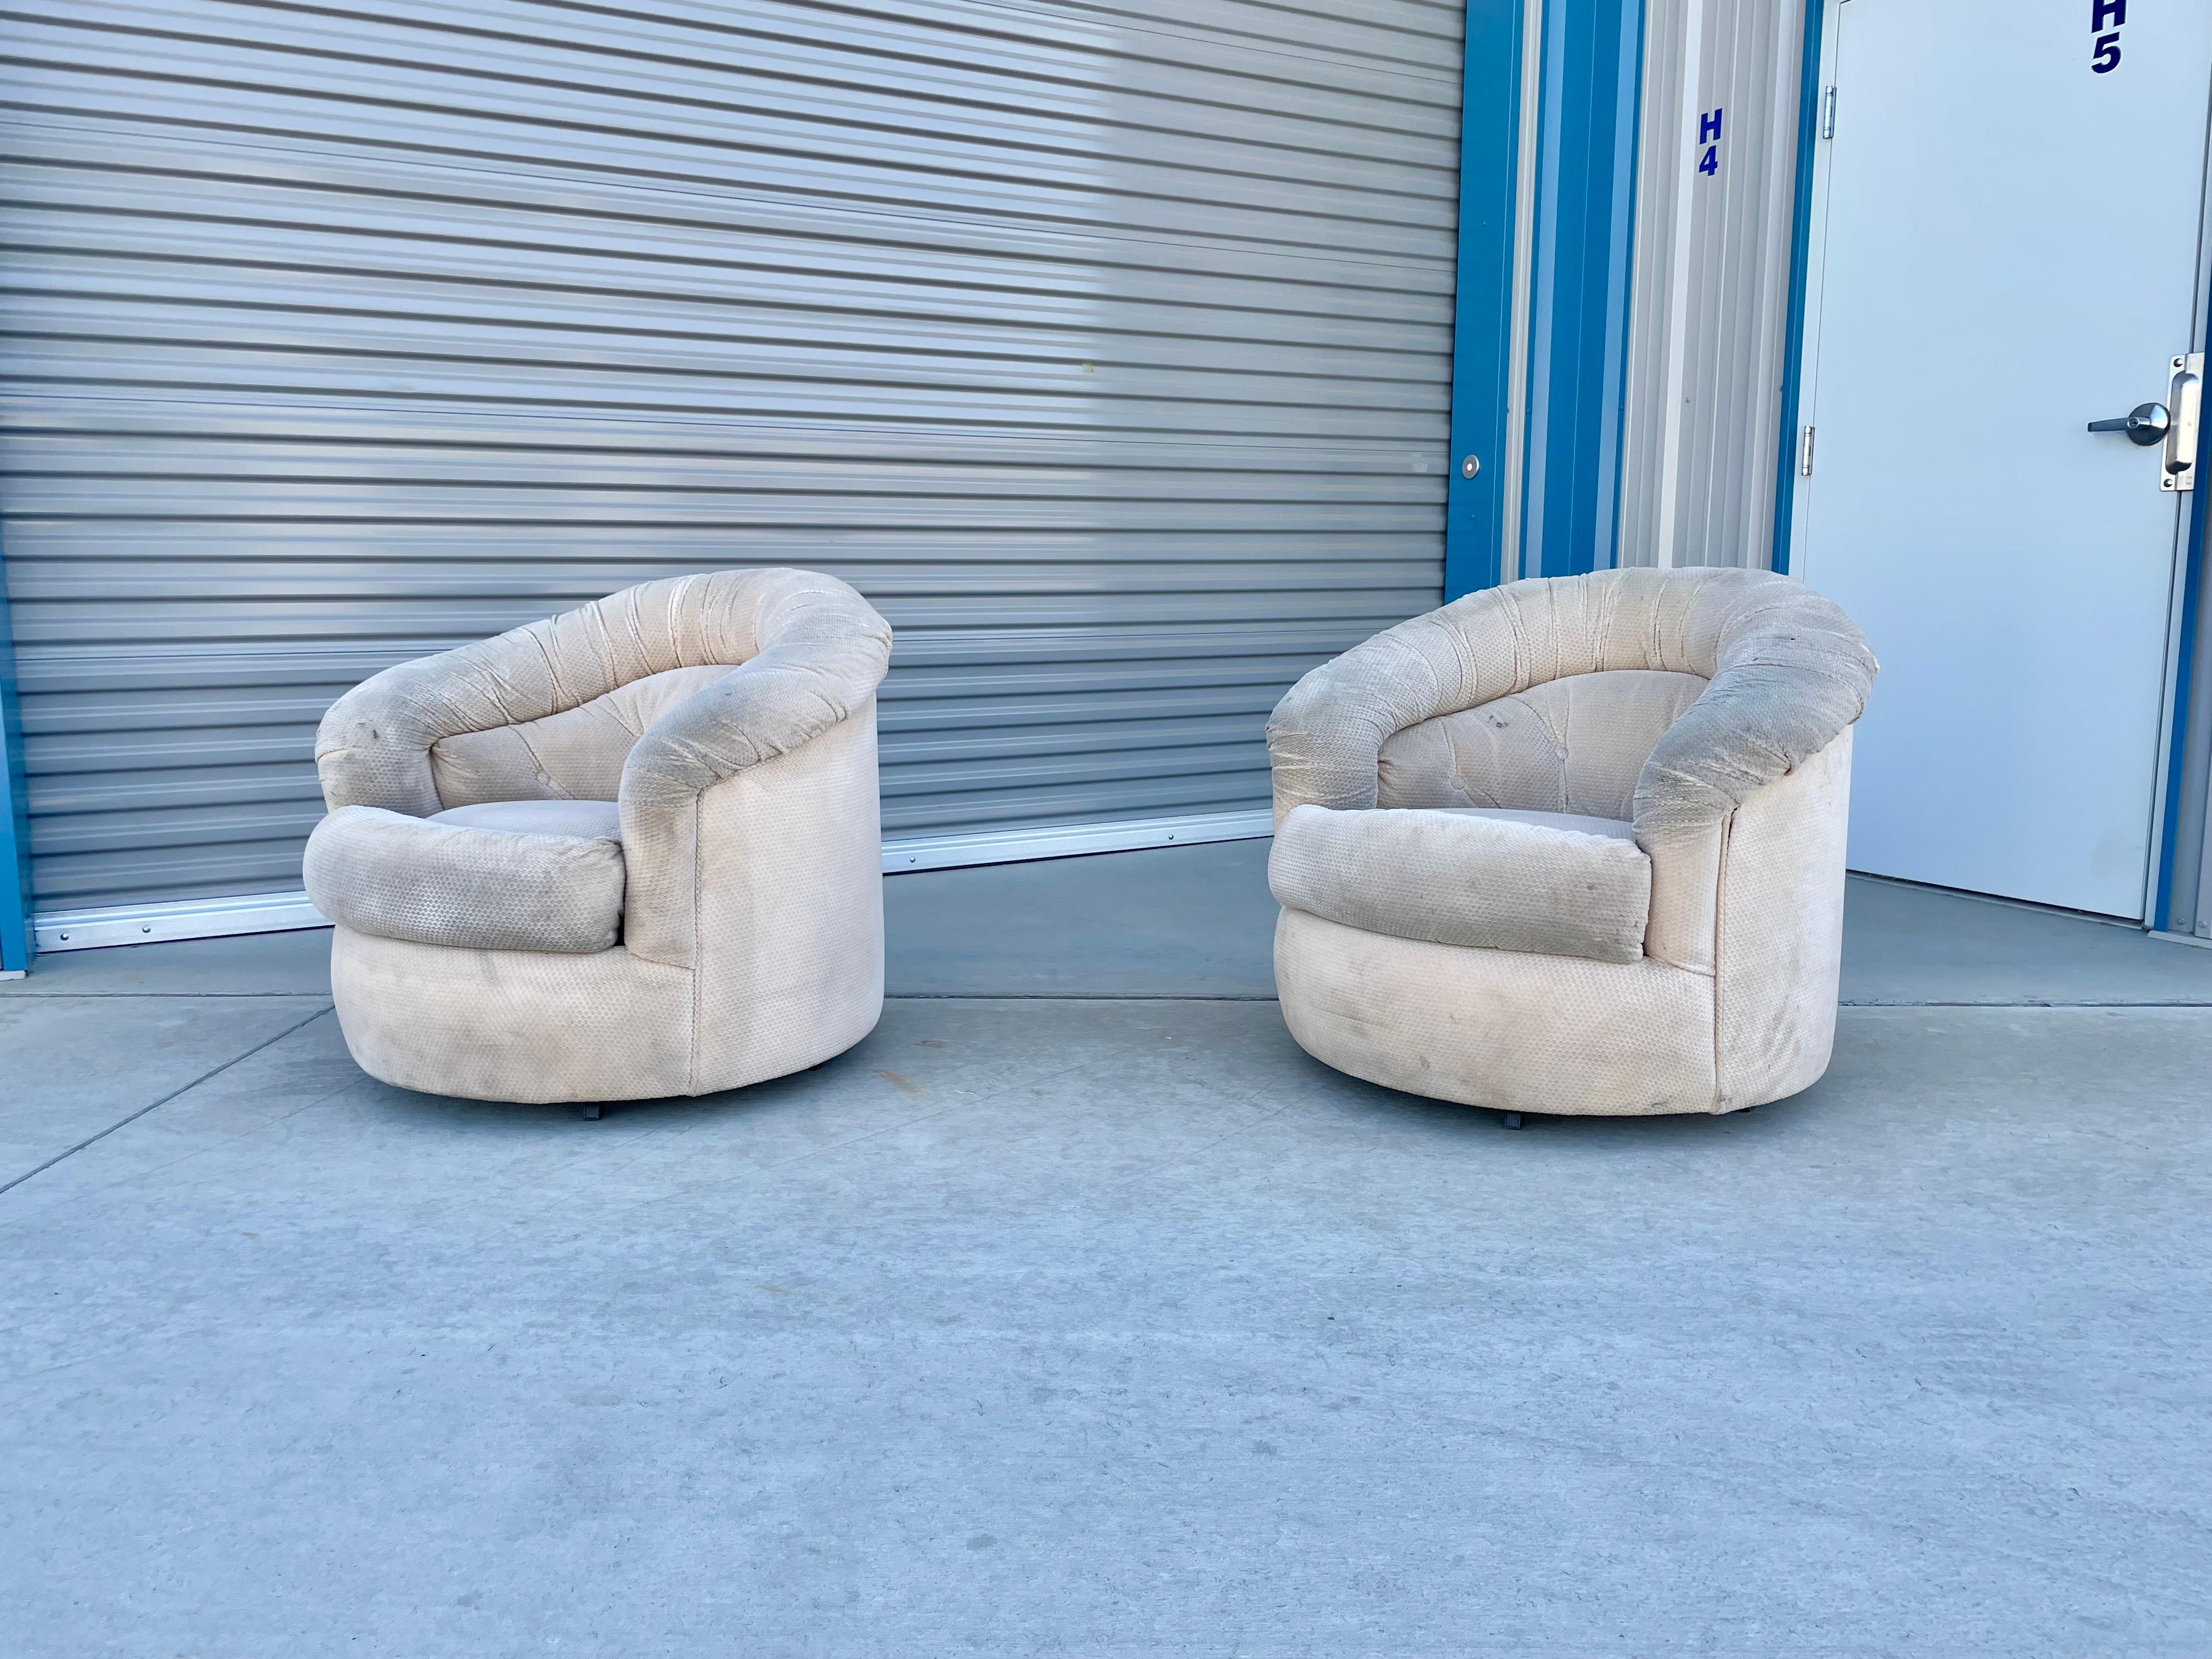 American Mid Century Barrel Chairs Styled After Milo Baughman For Sale